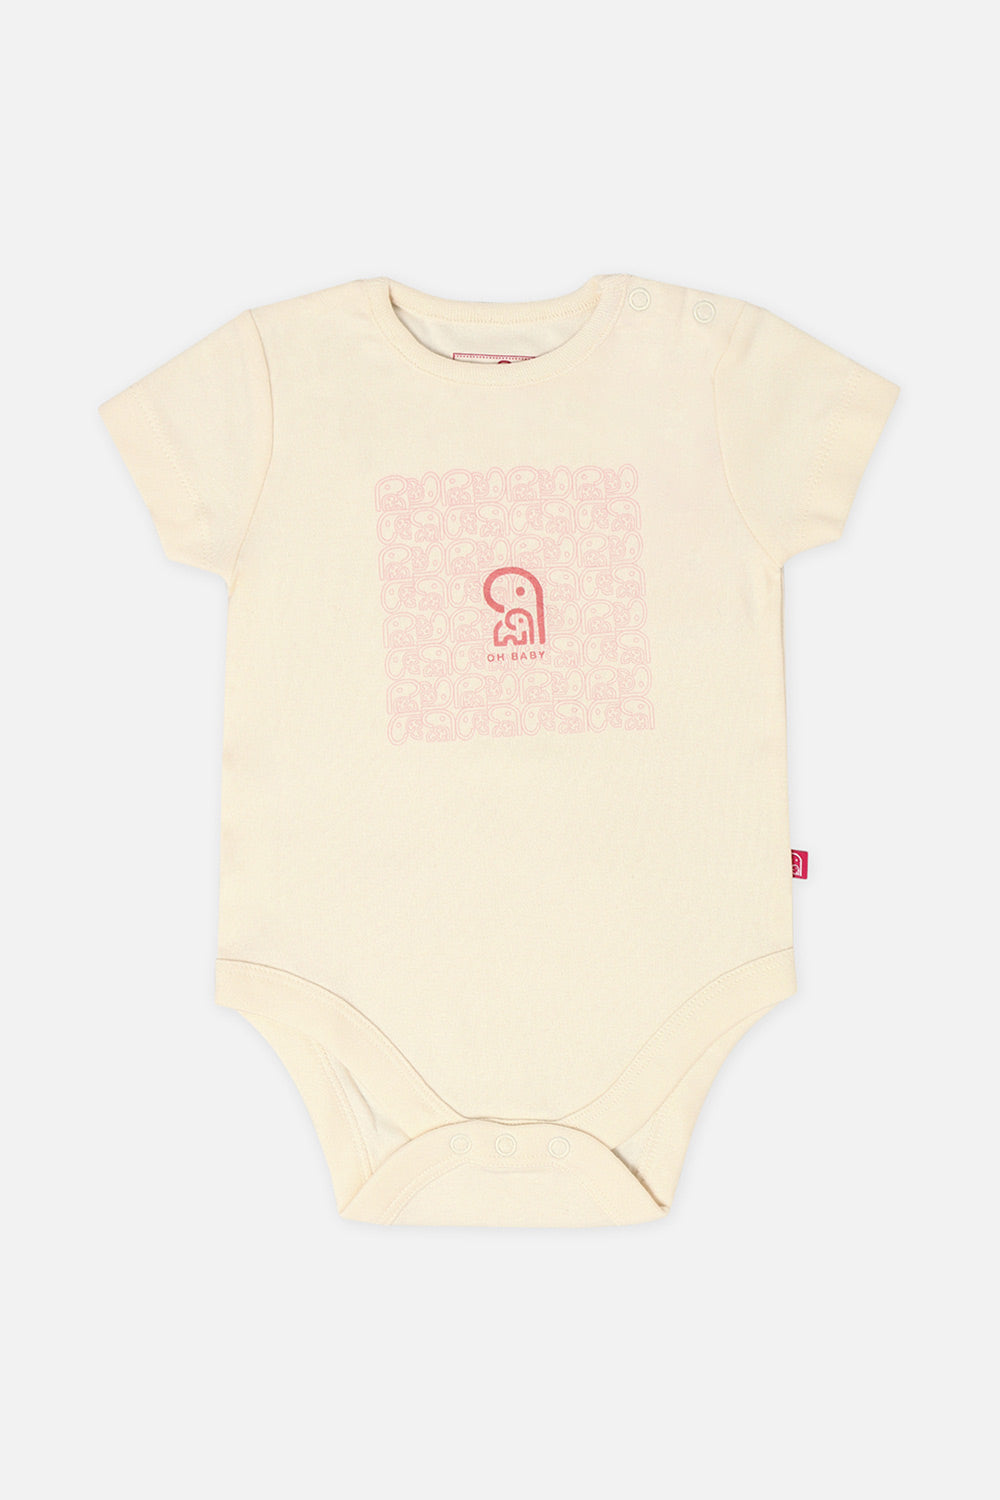 Oh Baby Onesies Shoulder Open White-Os04